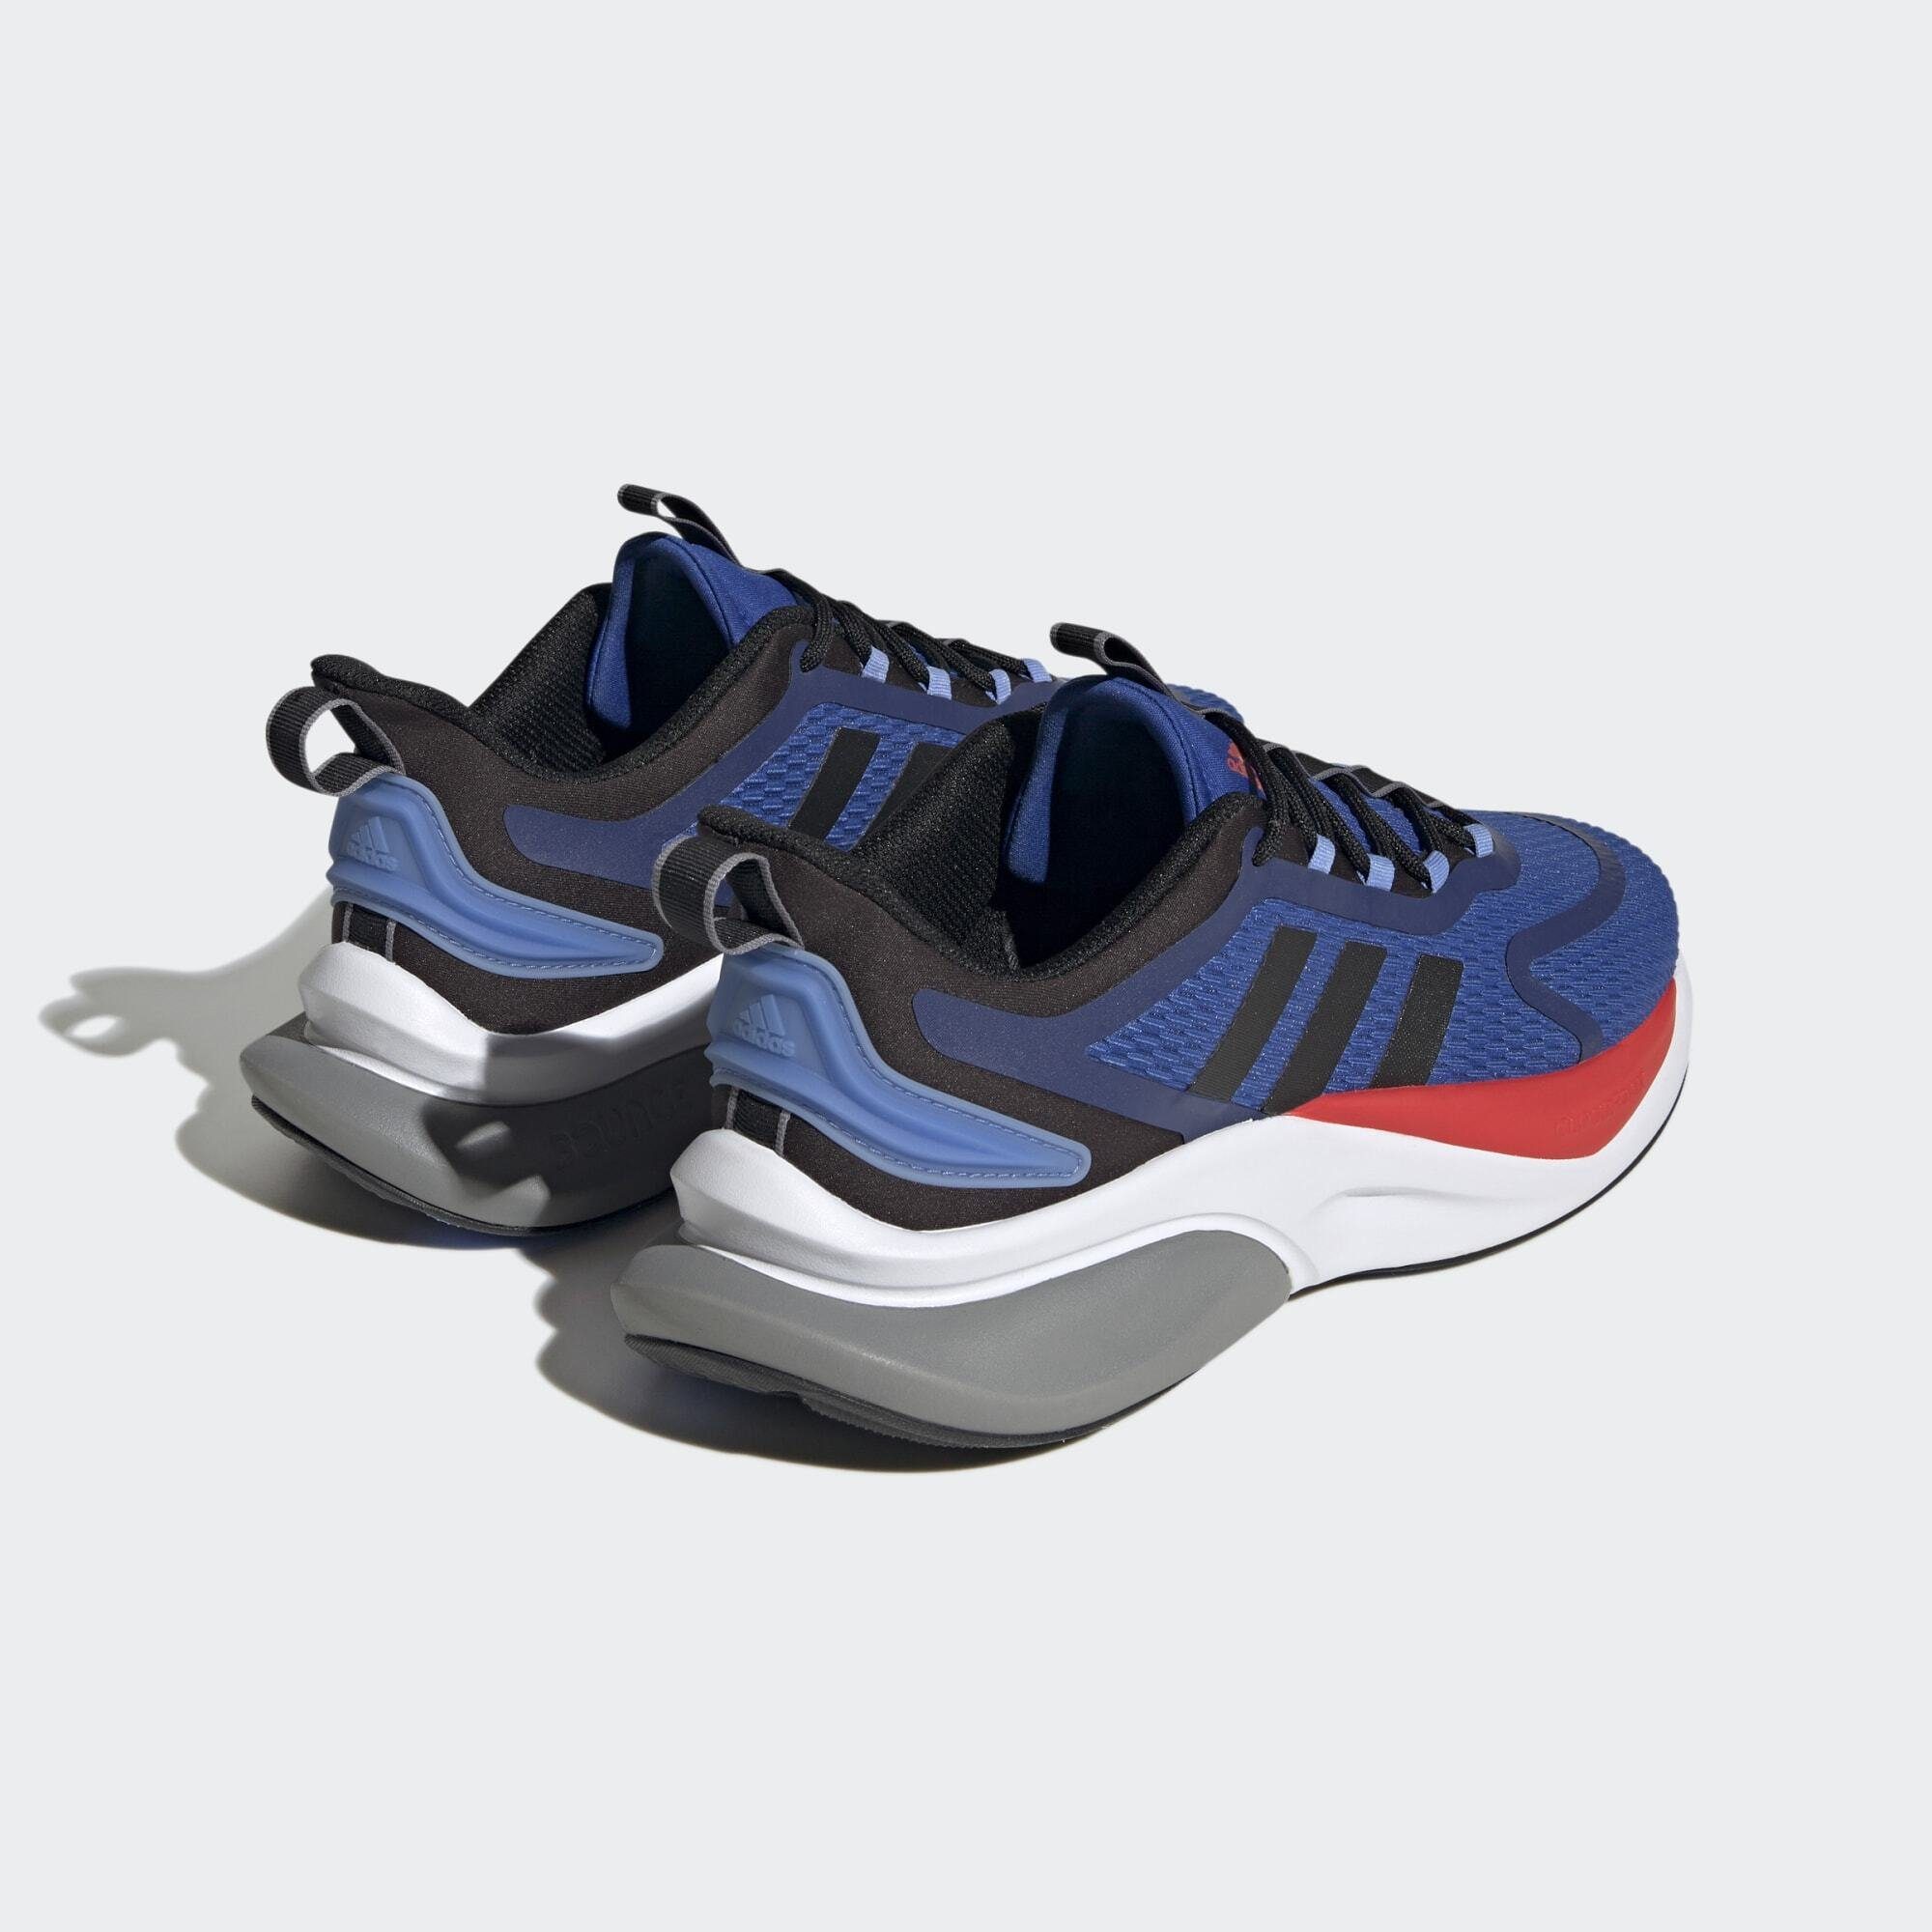 BOUNCE Blue Bright / / Sneaker adidas Core ALPHABOUNCE+ Royal SCHUH Red Black Sportswear